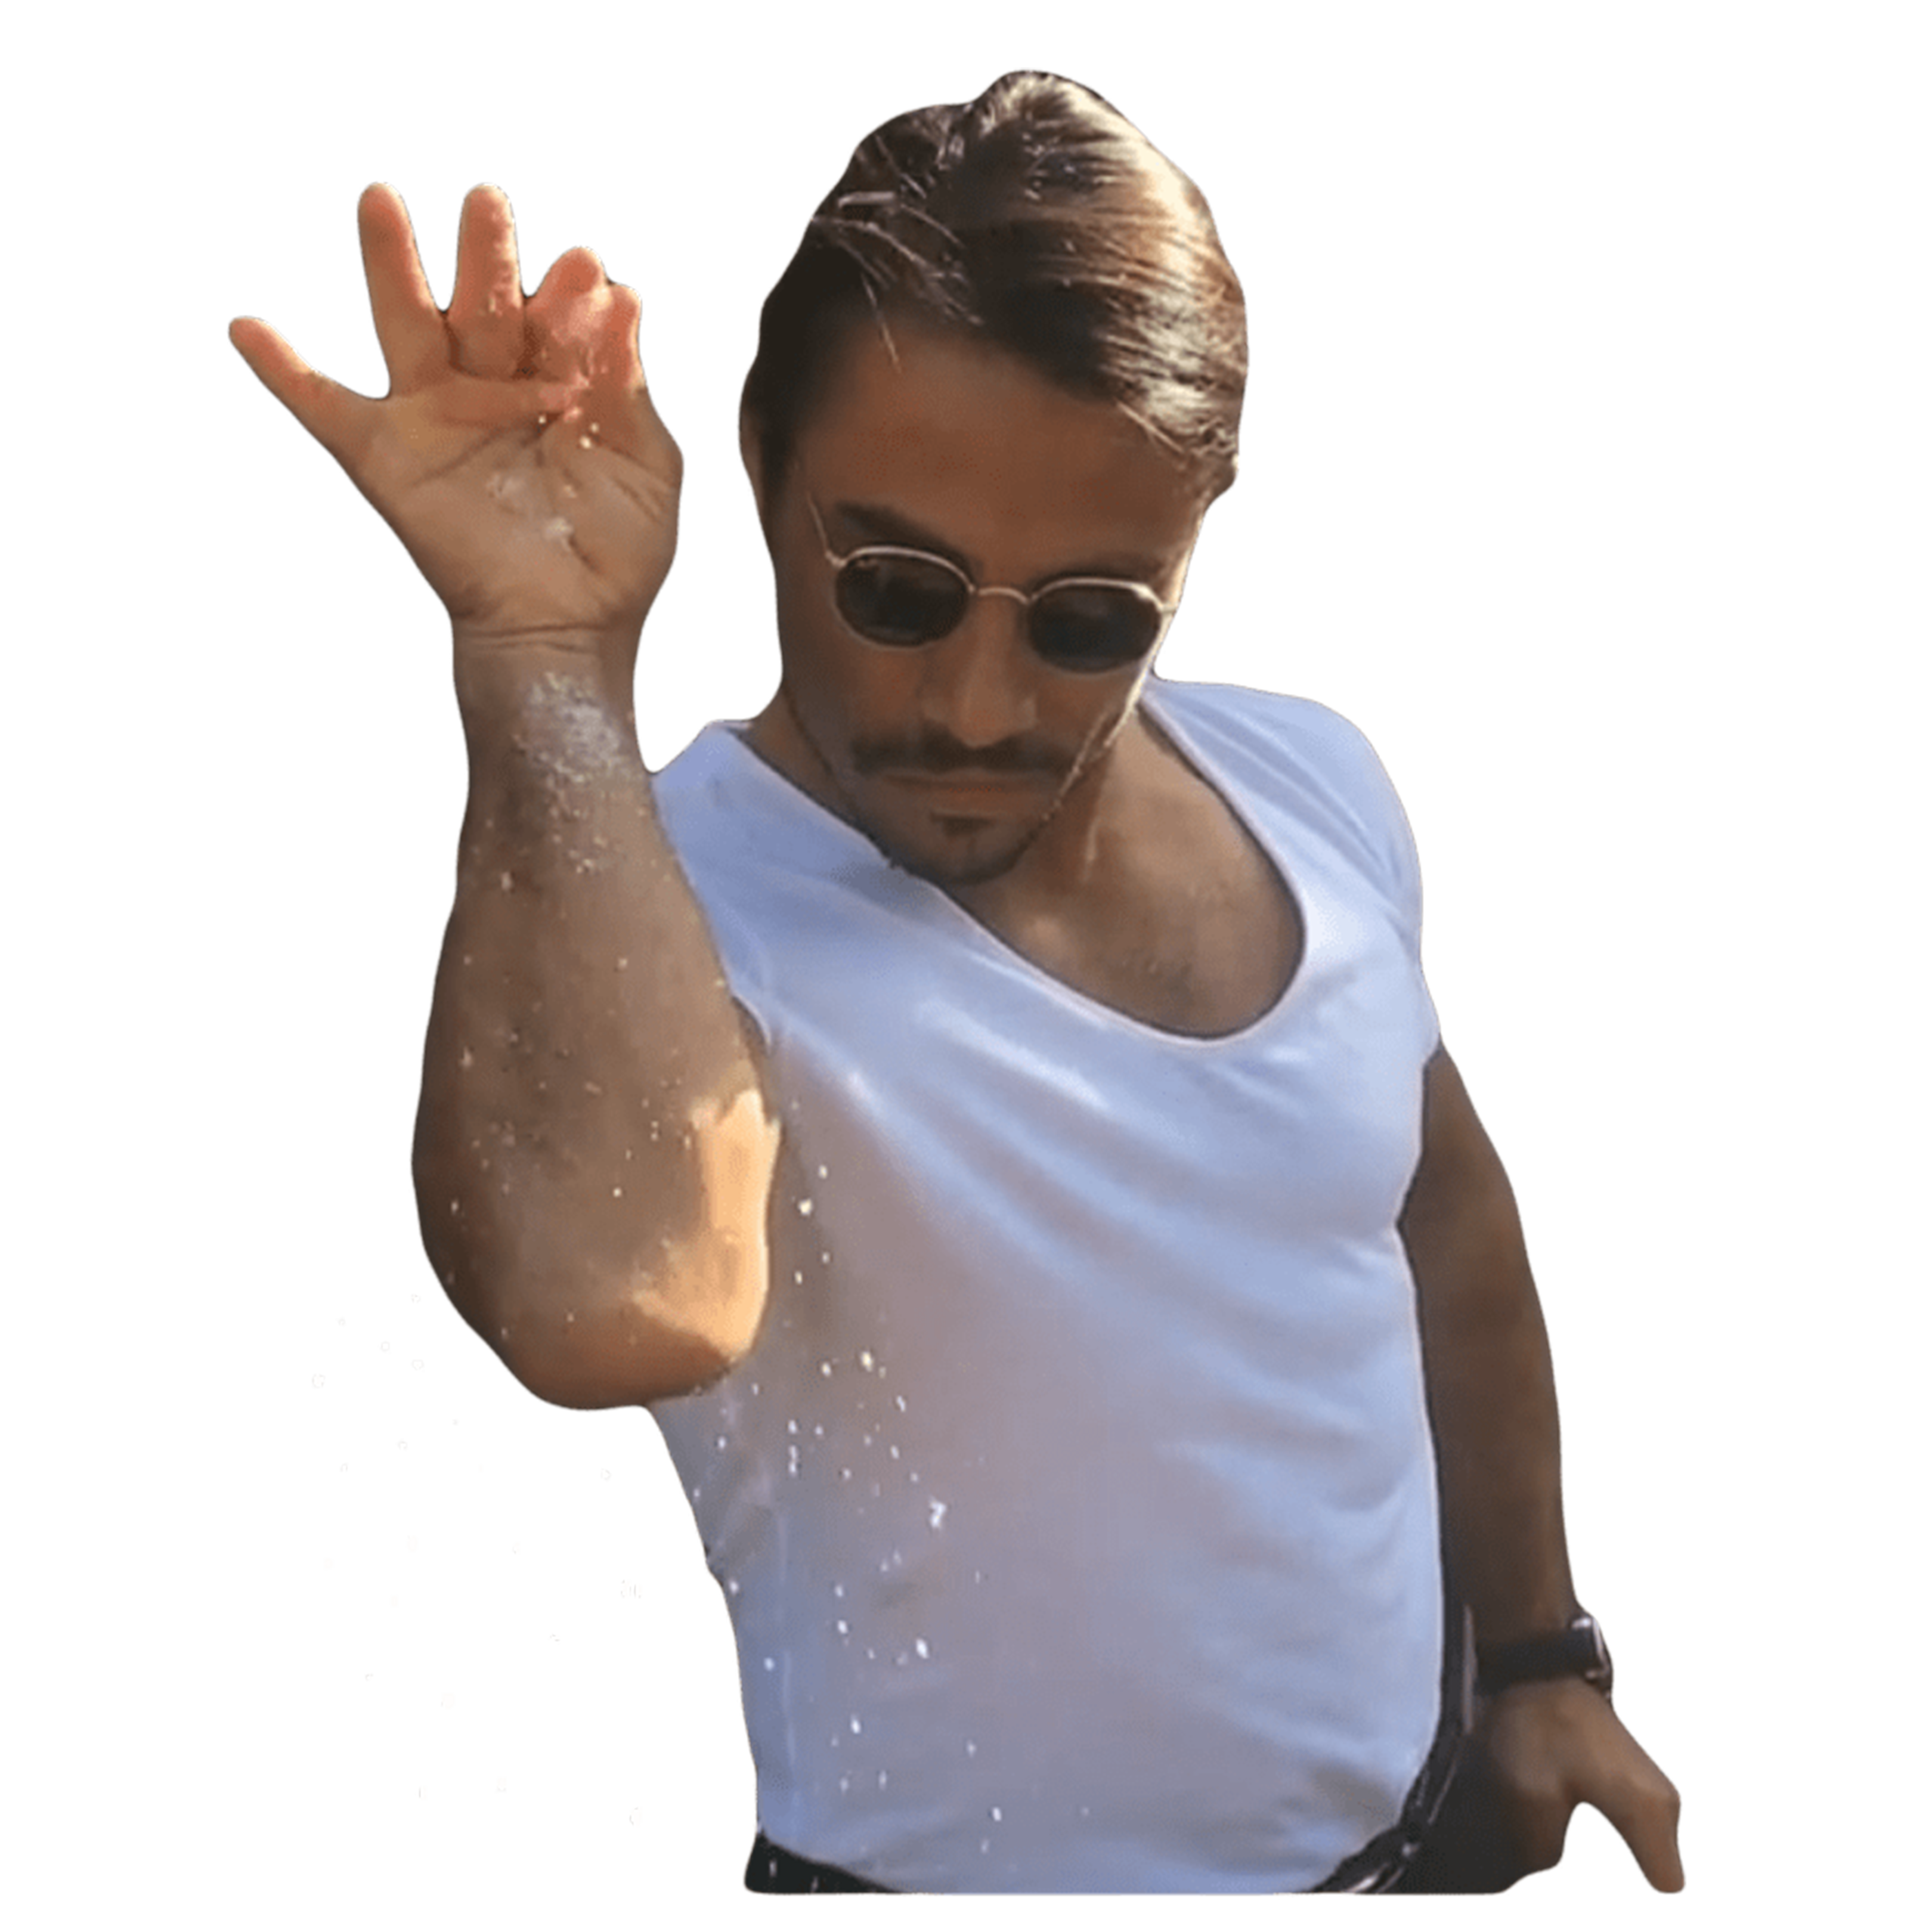 saltbae, restaurent, Business Motivations, Learning, LMS, Mobile App, Education Videos, Hire, Remote Employees, Ecommerce, Team, Virtual Employees, United States, Canada, E-Commerce, Restaurant, Online Ordering Solutions,  Online Ordering, Mobile App, Virtual Employee, Team, United States, Canada, Online Ordering, Online Payment, CRM, Cloud Telephony, Online Table Booking or Reservation, Website, Digital Marketing, social media, Graphic Design, Advertising, Entrepreneurs, Business Owners, Subscribe, Credit Card, Cloud Kitchen